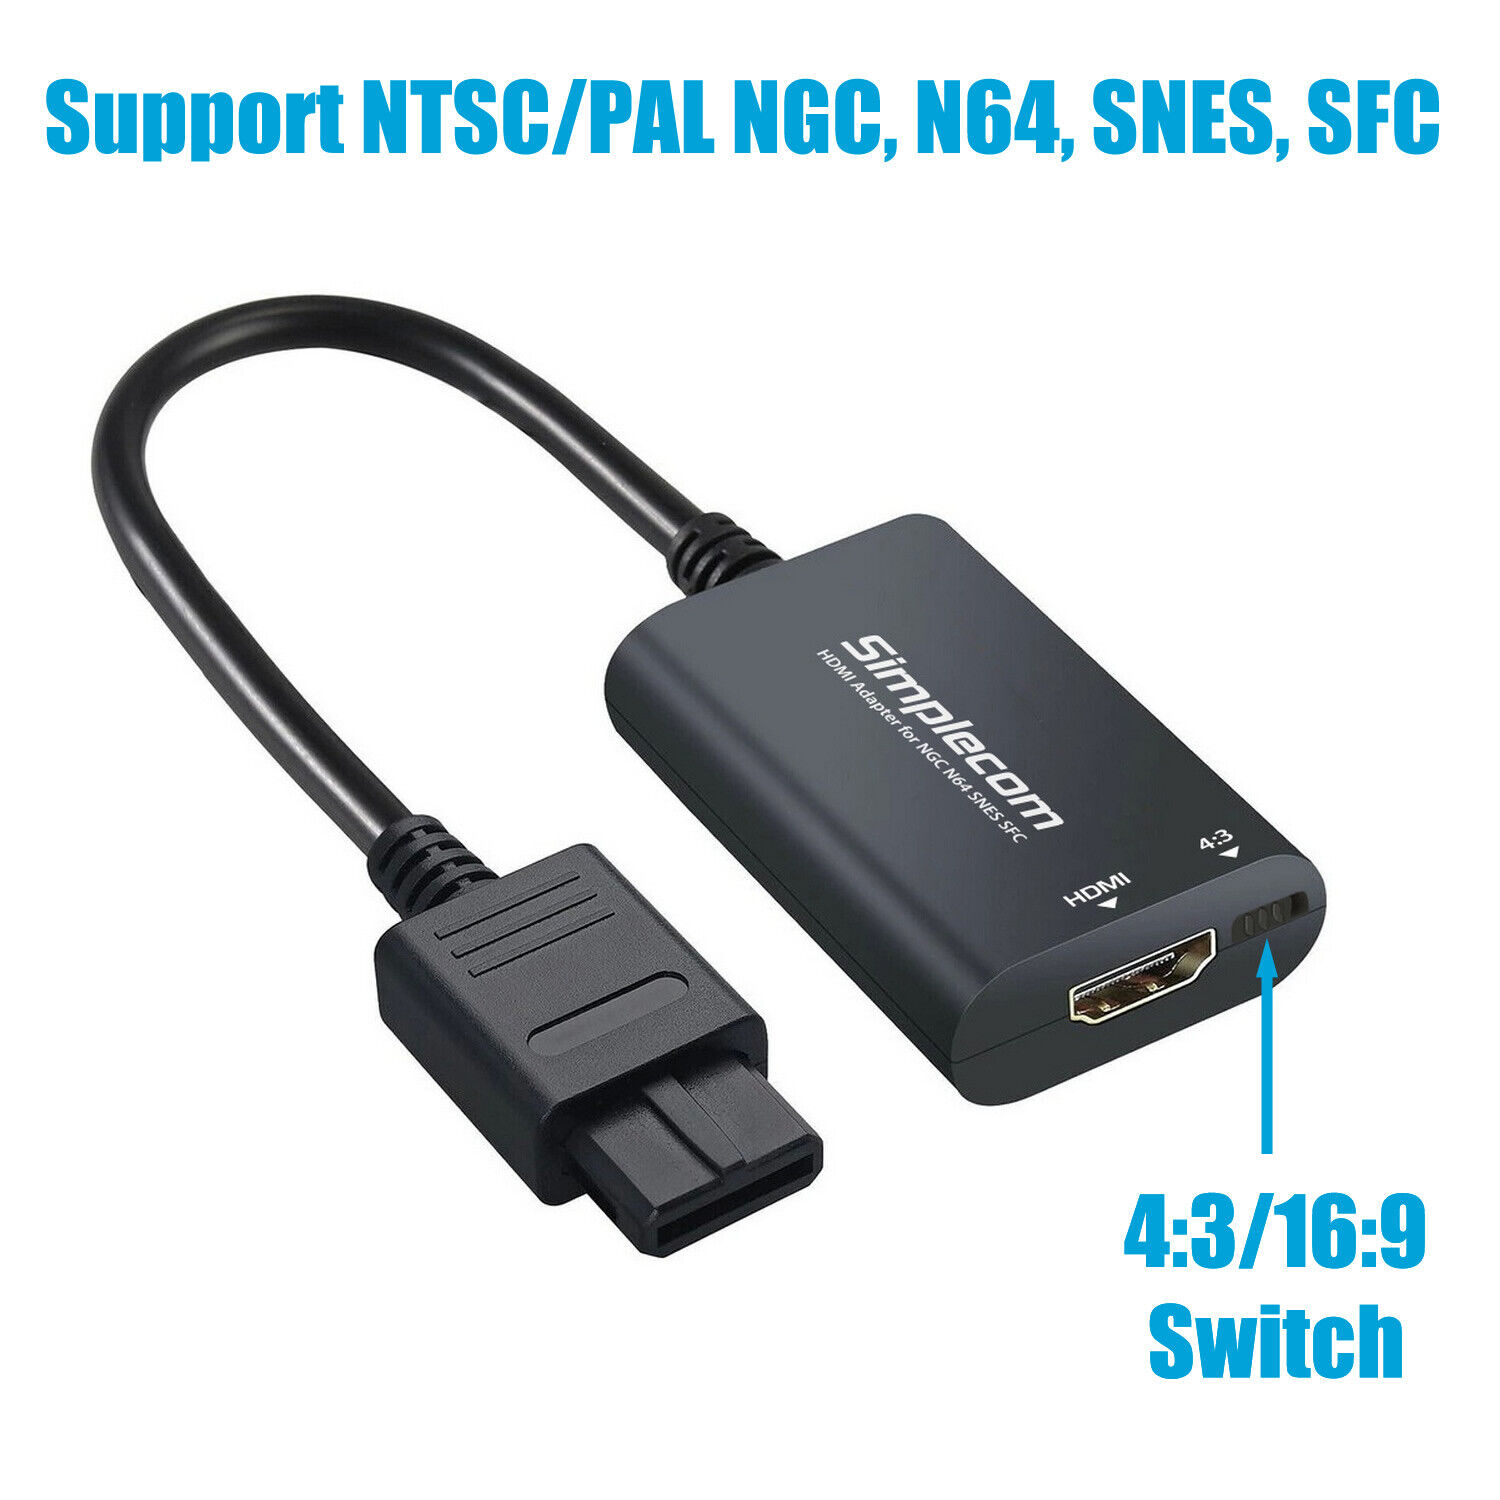 HDMI Cable Adapter Converter Composite AV to HDMI for Nintendo NGC N64 SNES SFC Connectivity: HDMI Type: Adaptor C